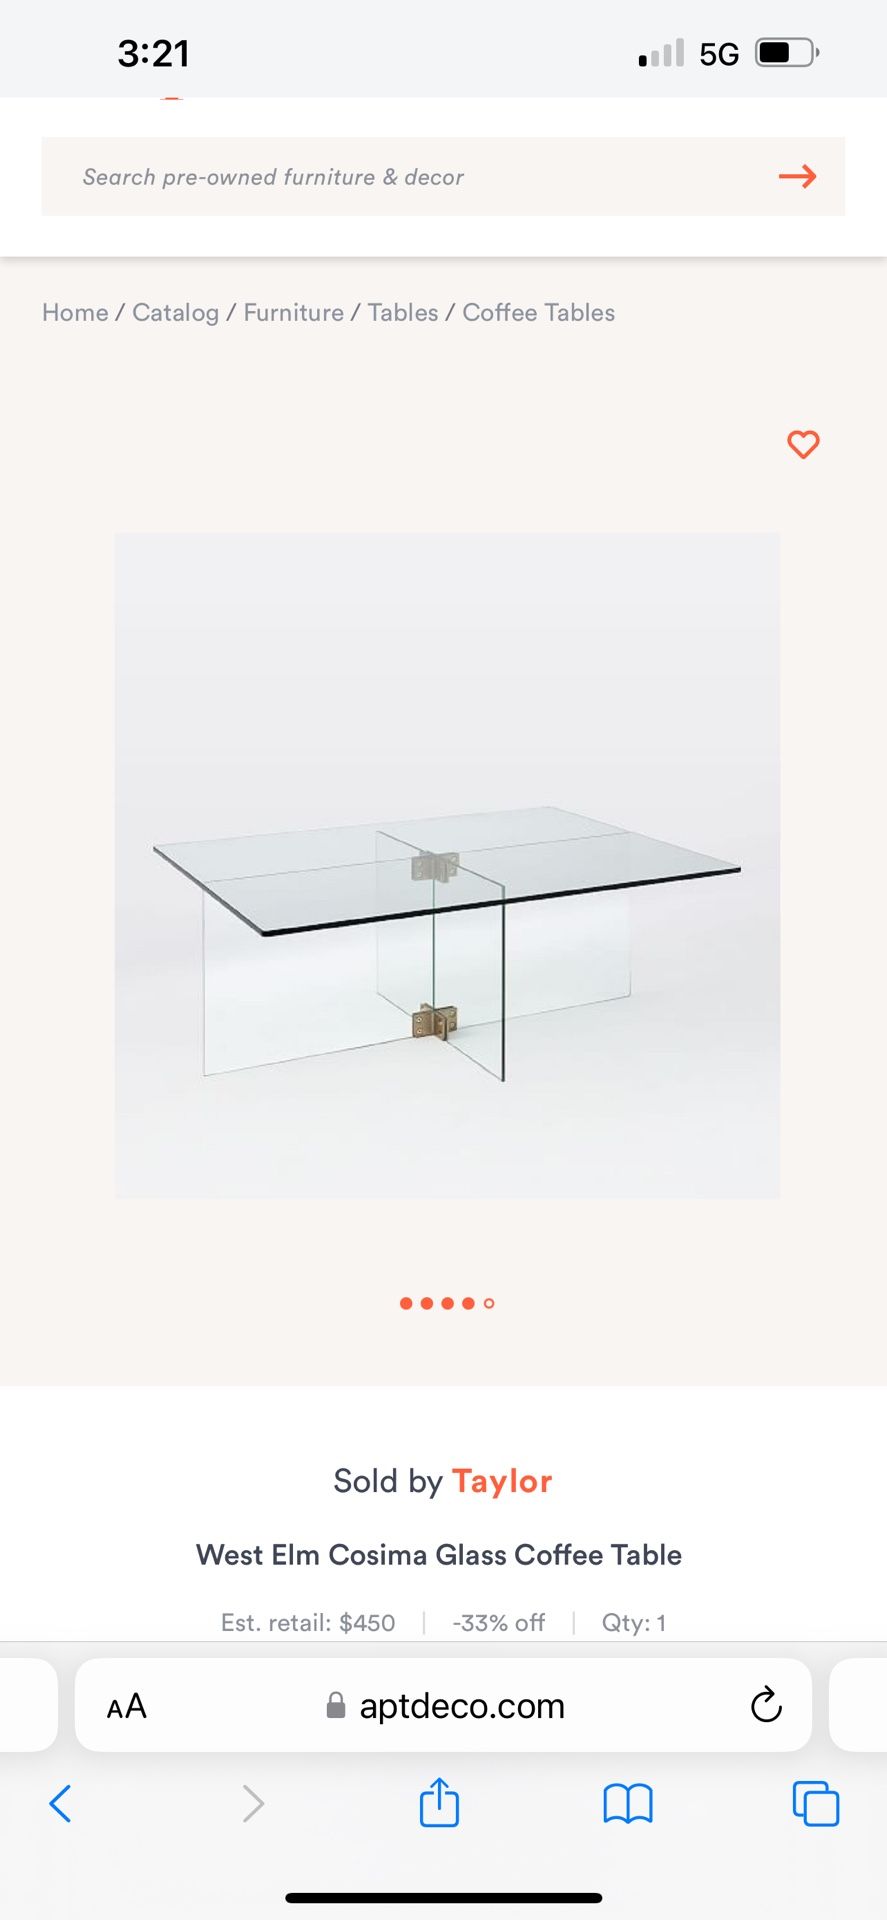 West Elm Glass Coffee Table